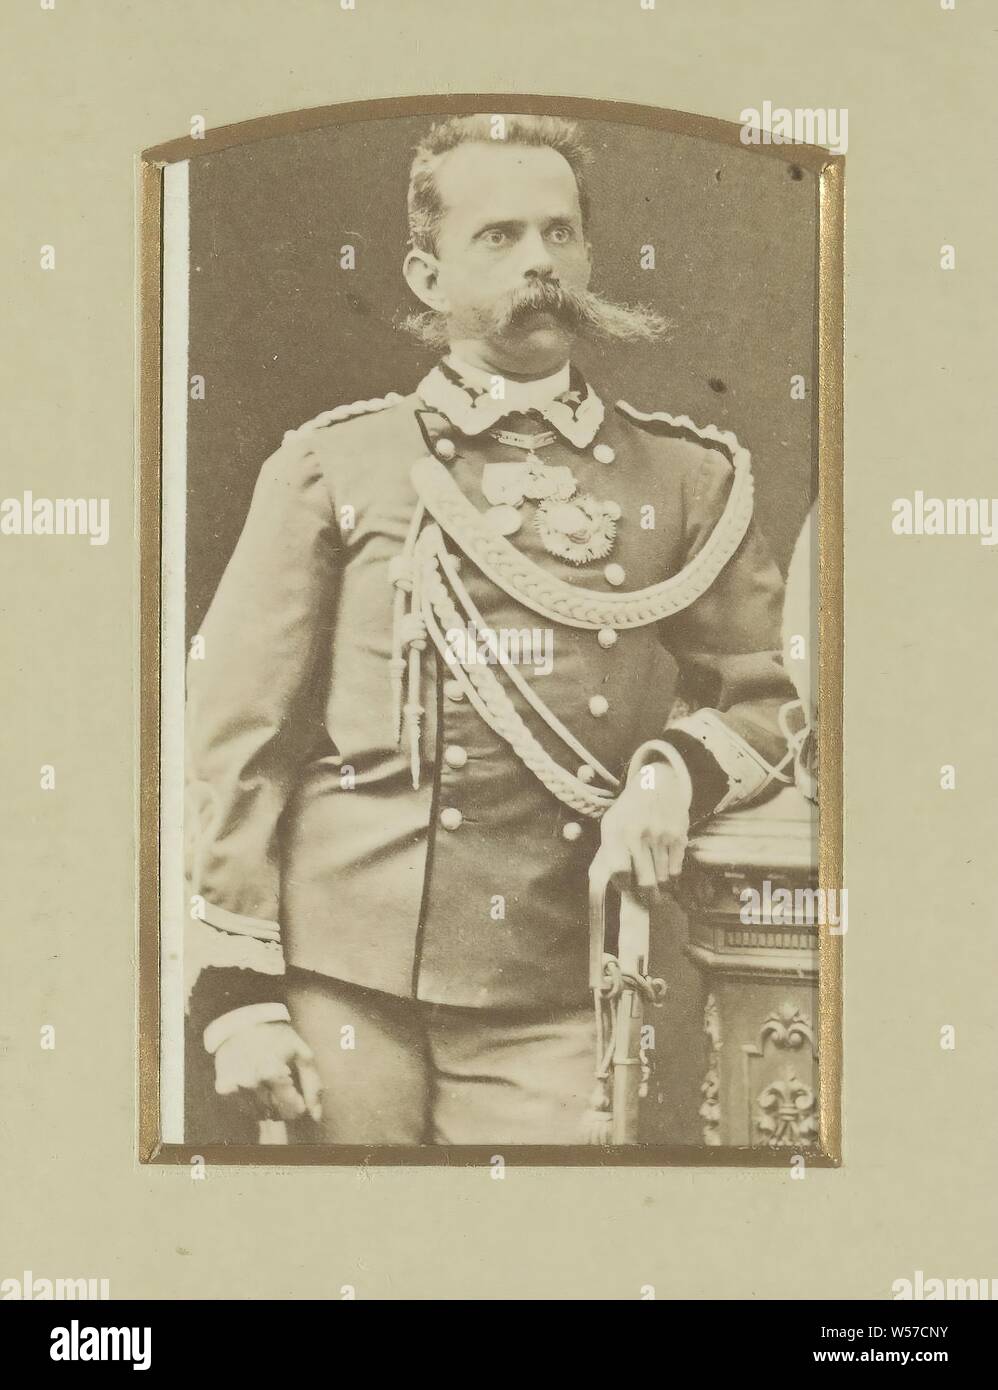 Portrait of a (probably) Italian soldier, standing with saber in his hand, Part of Album with cartes-de-visite and cabinet photos of soldiers in uniform., warfare, military affairs, division of armed forces, (military) uniforms, mustache, hacking and thrusting weapons (with NAME), Italy, anonymous, Italy (possibly), c. 1860 - c. 1880, cardboard, paper, photographic paper, albumen print, h 104 mm × w 61 mm Stock Photo